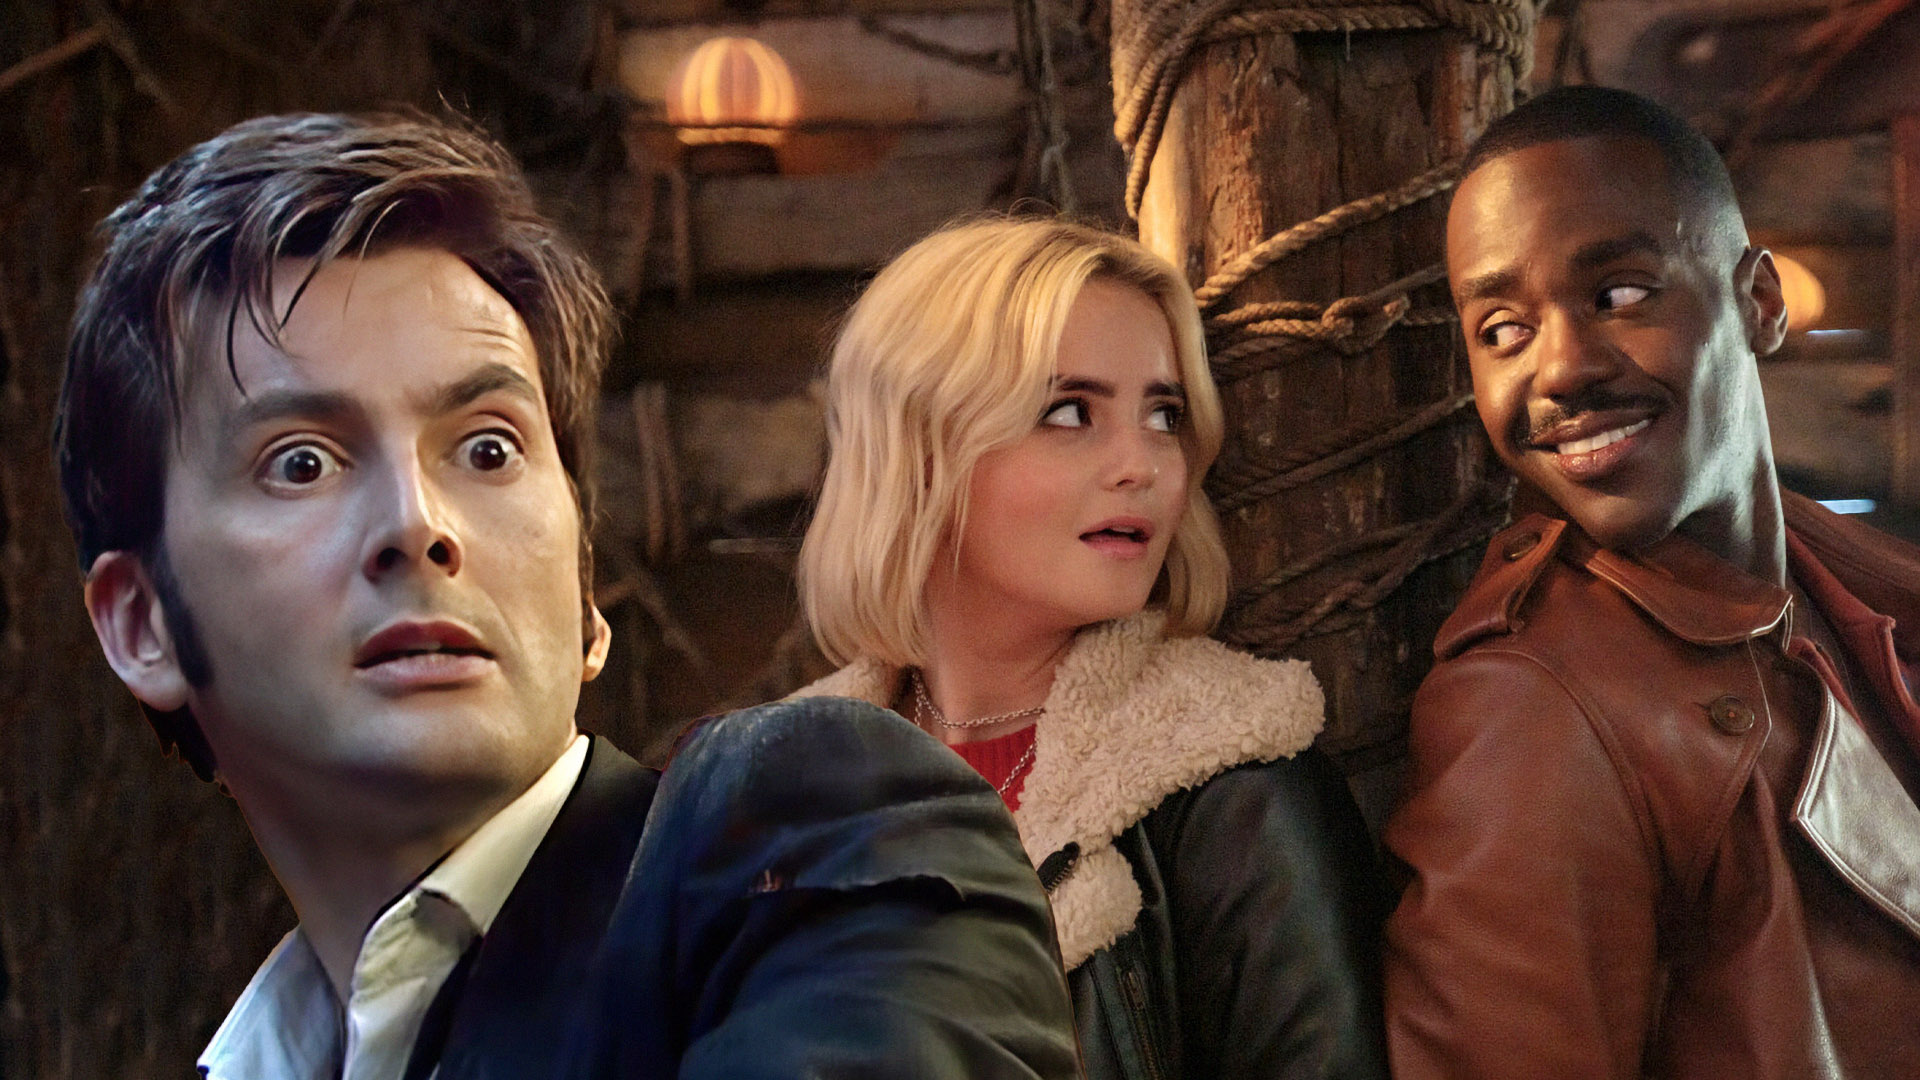 Doctor Who's New Sidekick: Who Will Replace Millie Gibson in the Next Installment?